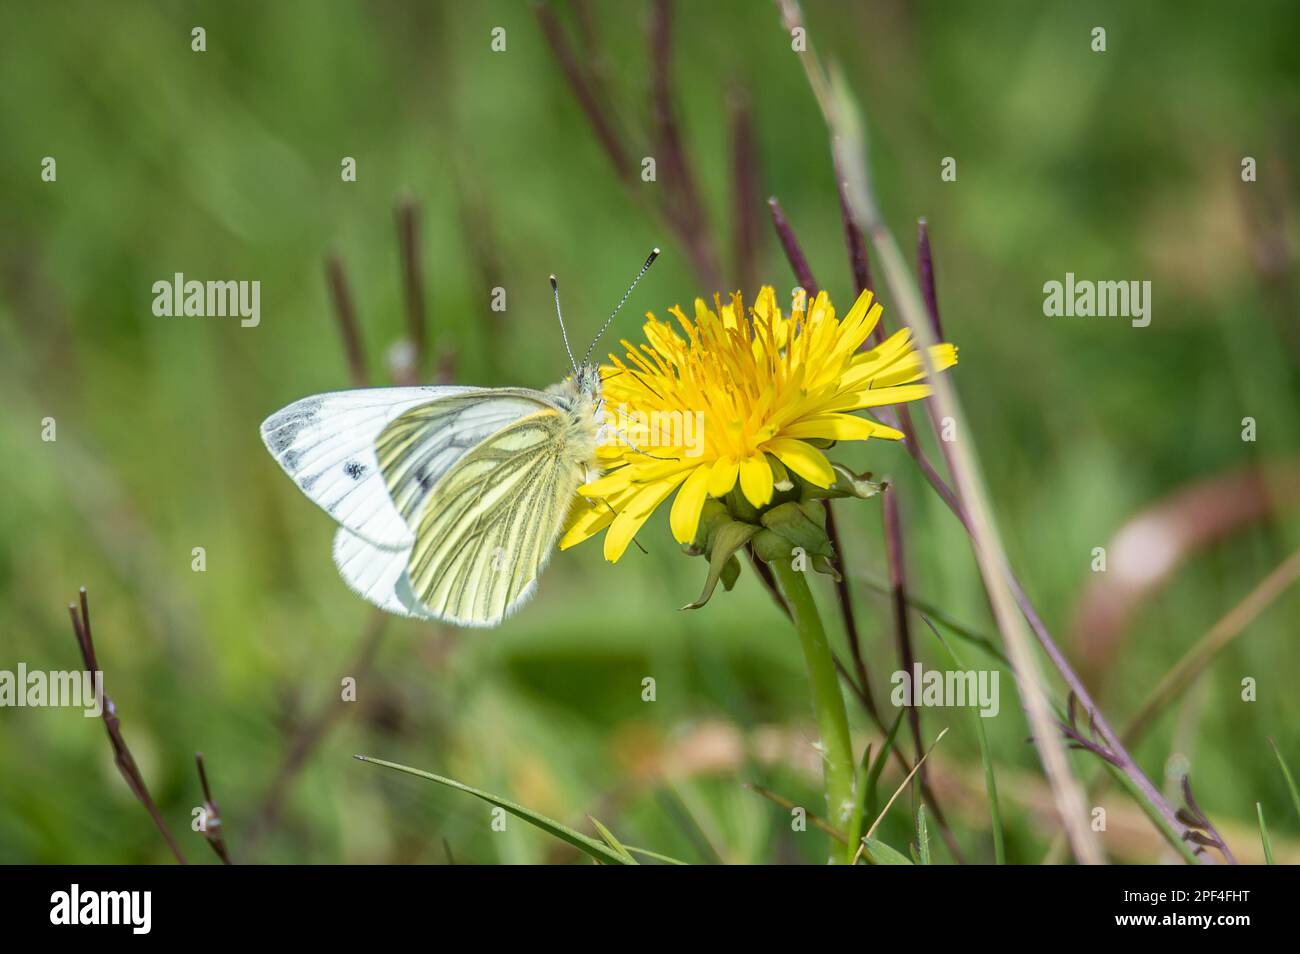 Green-veined white butterfly hanging from a dandelion Stock Photo